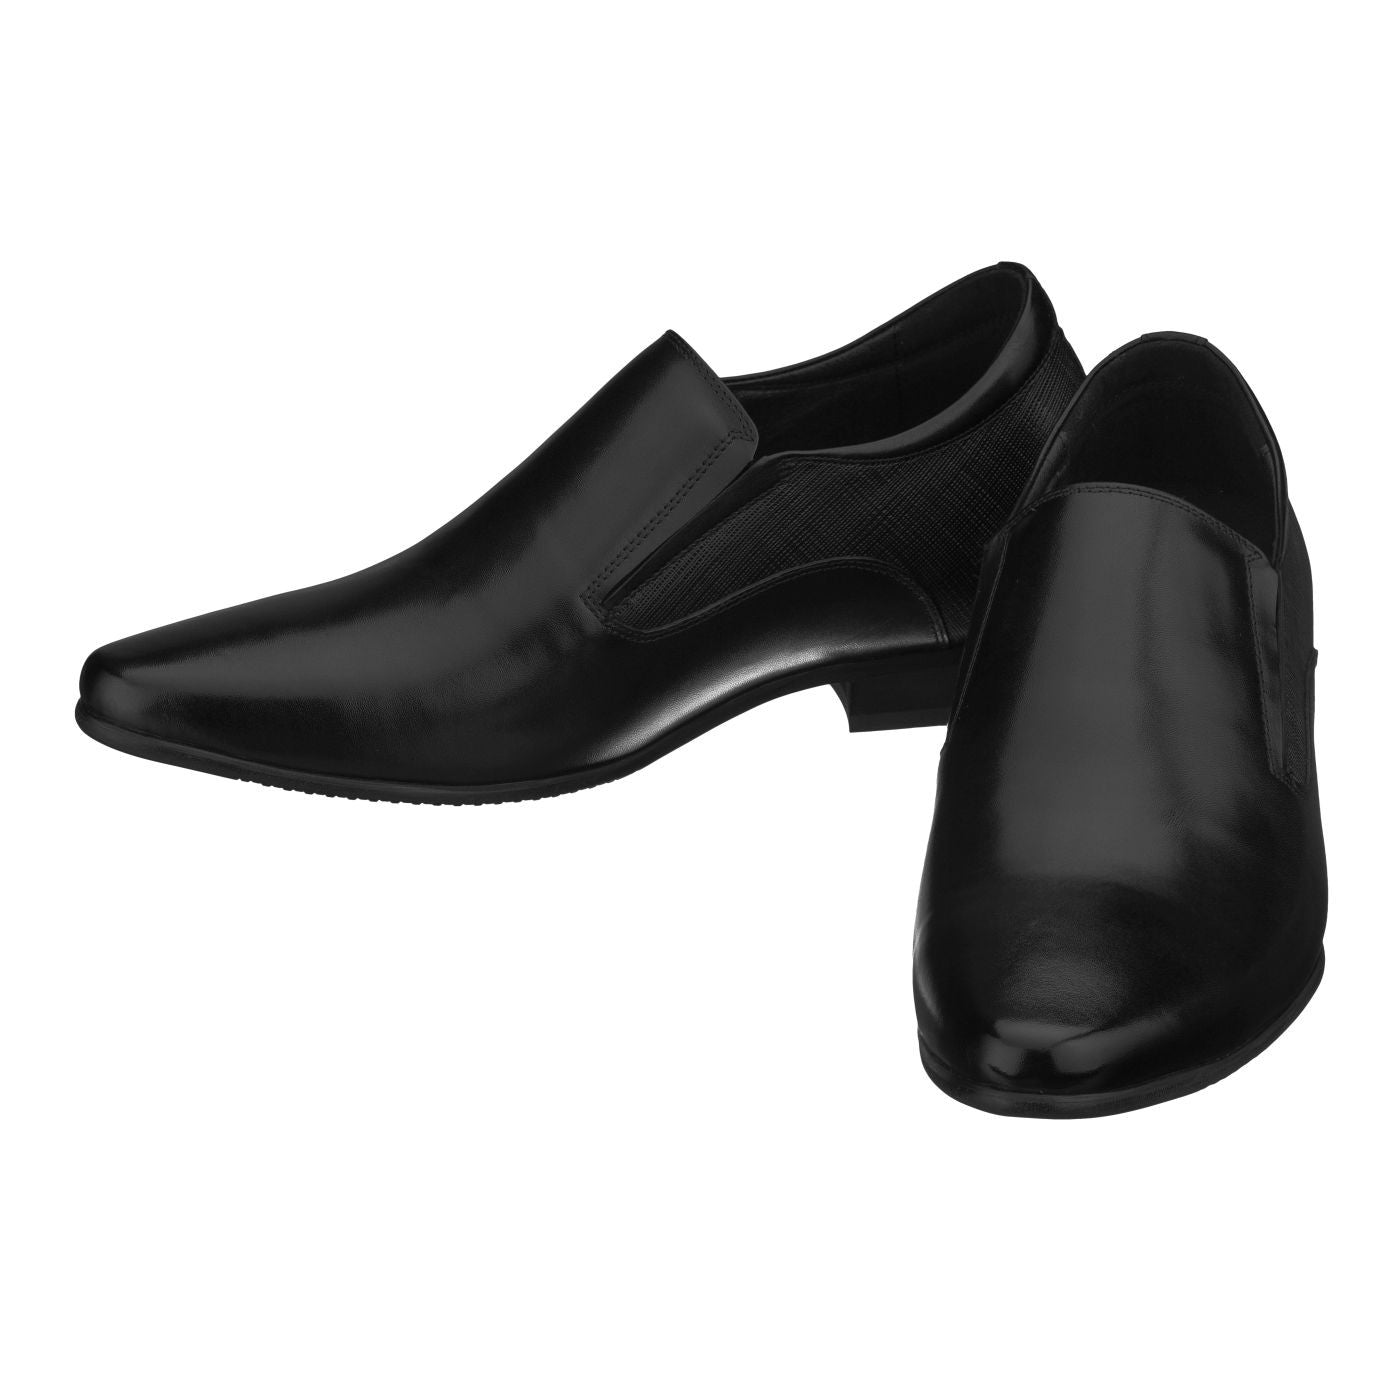 Elevator shoes height increase CALTO - Y5530 - 3.0 Inches Taller (Black) - Lightweight